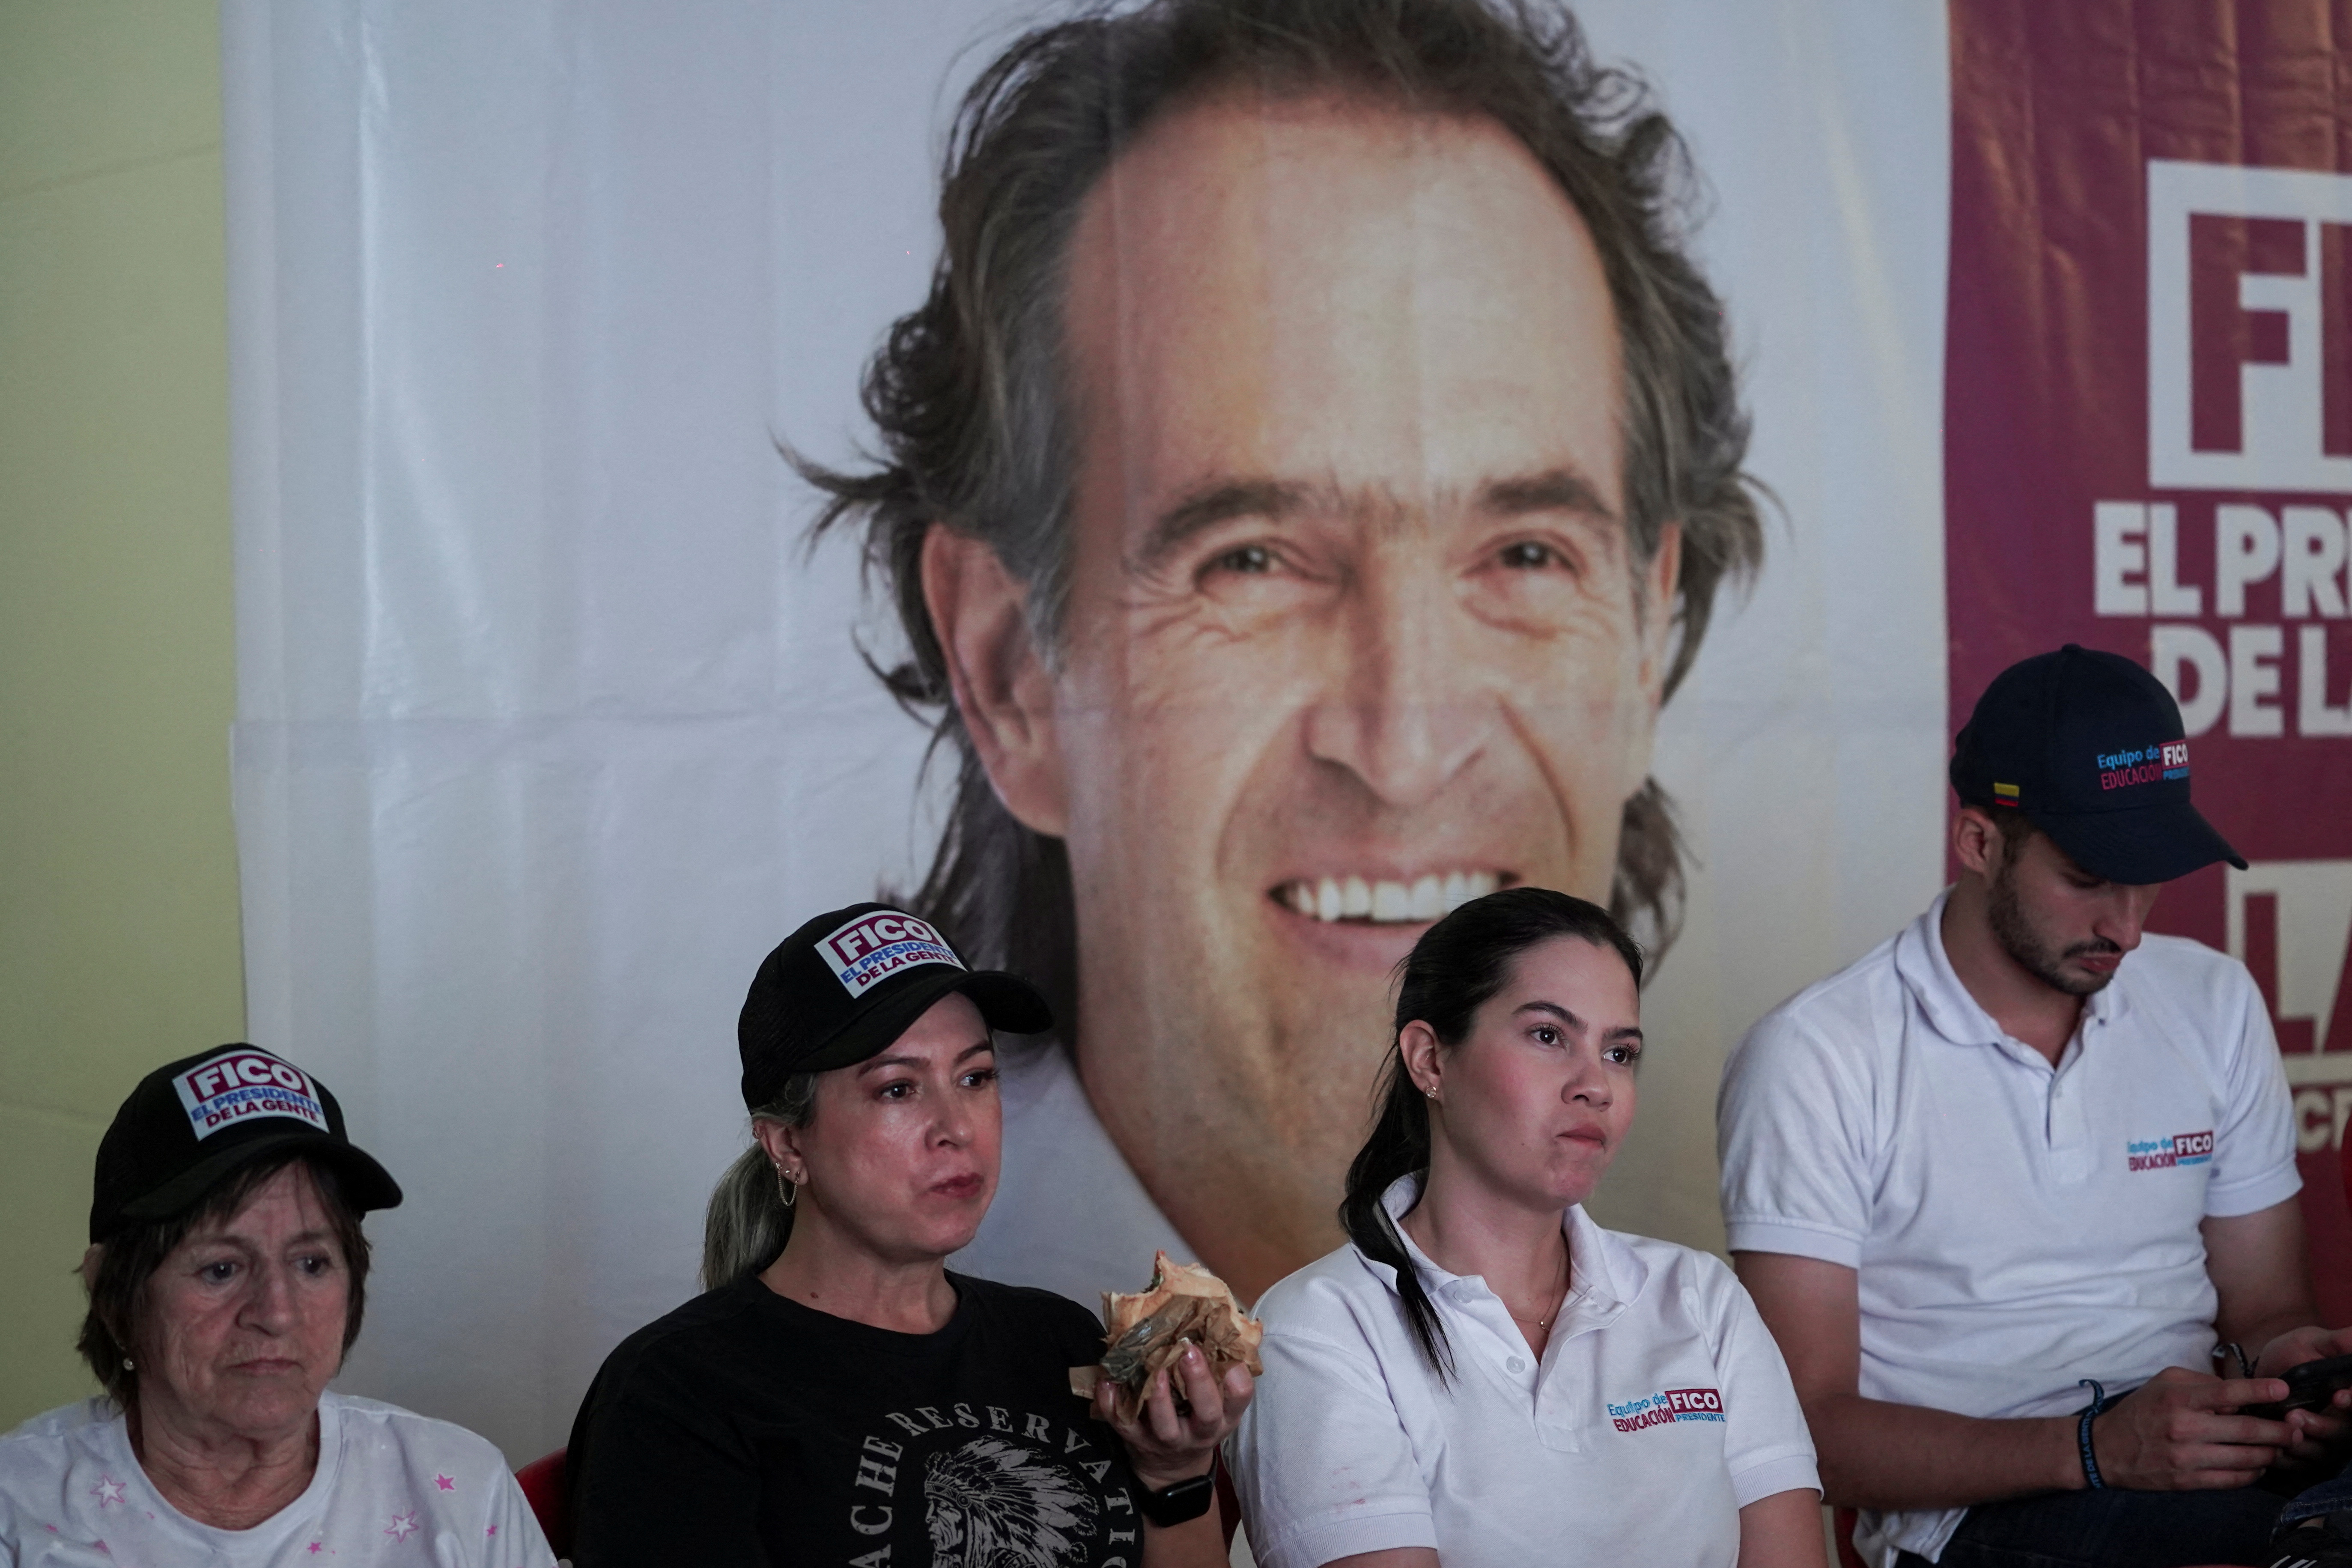 Colombians head to polls in divisive presidential contest